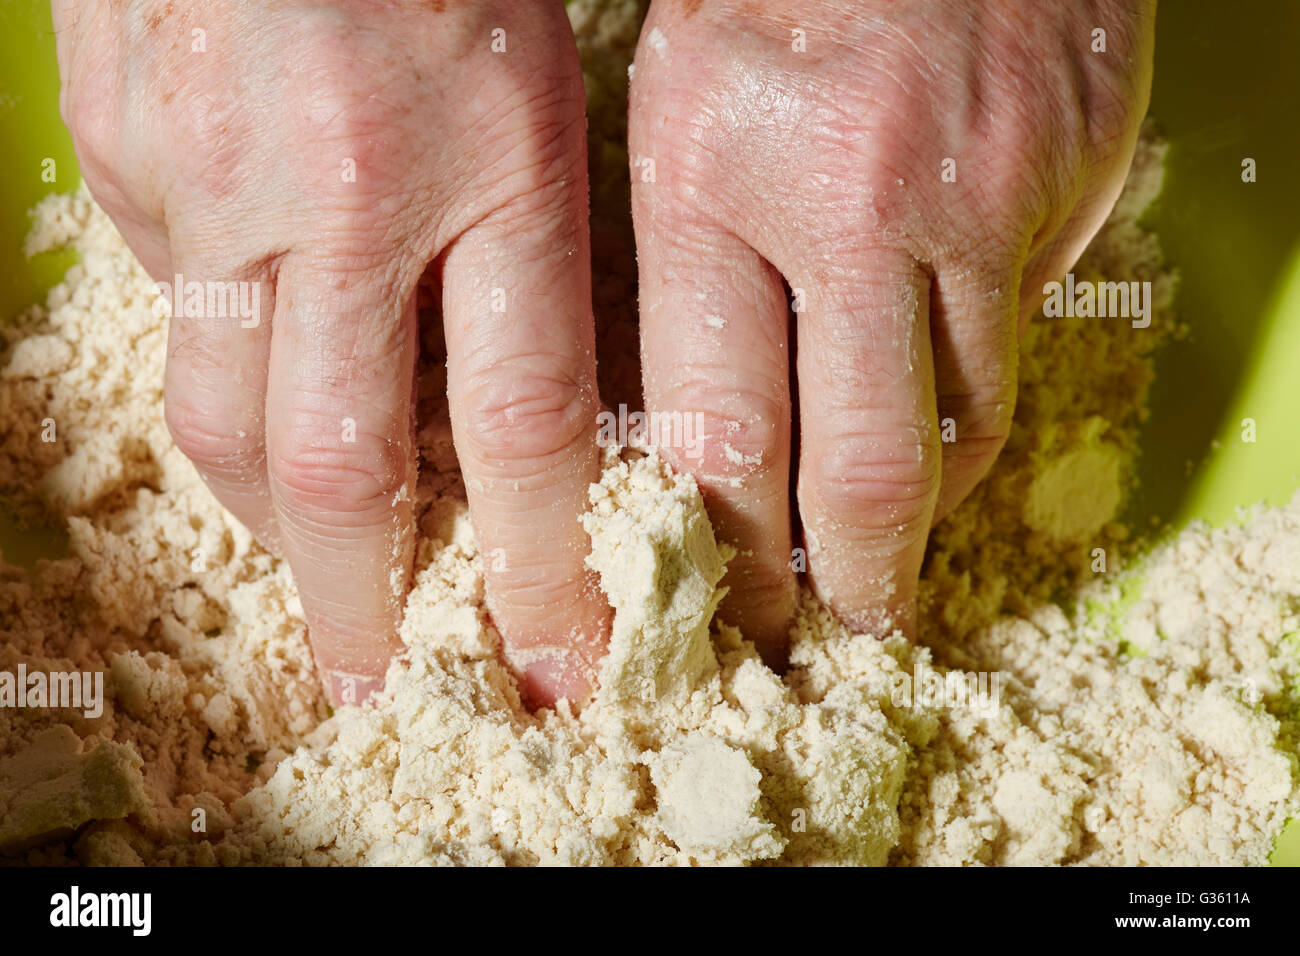 Man's hands kneading a pie (or pasty) crust dough with flour and shortening Stock Photo